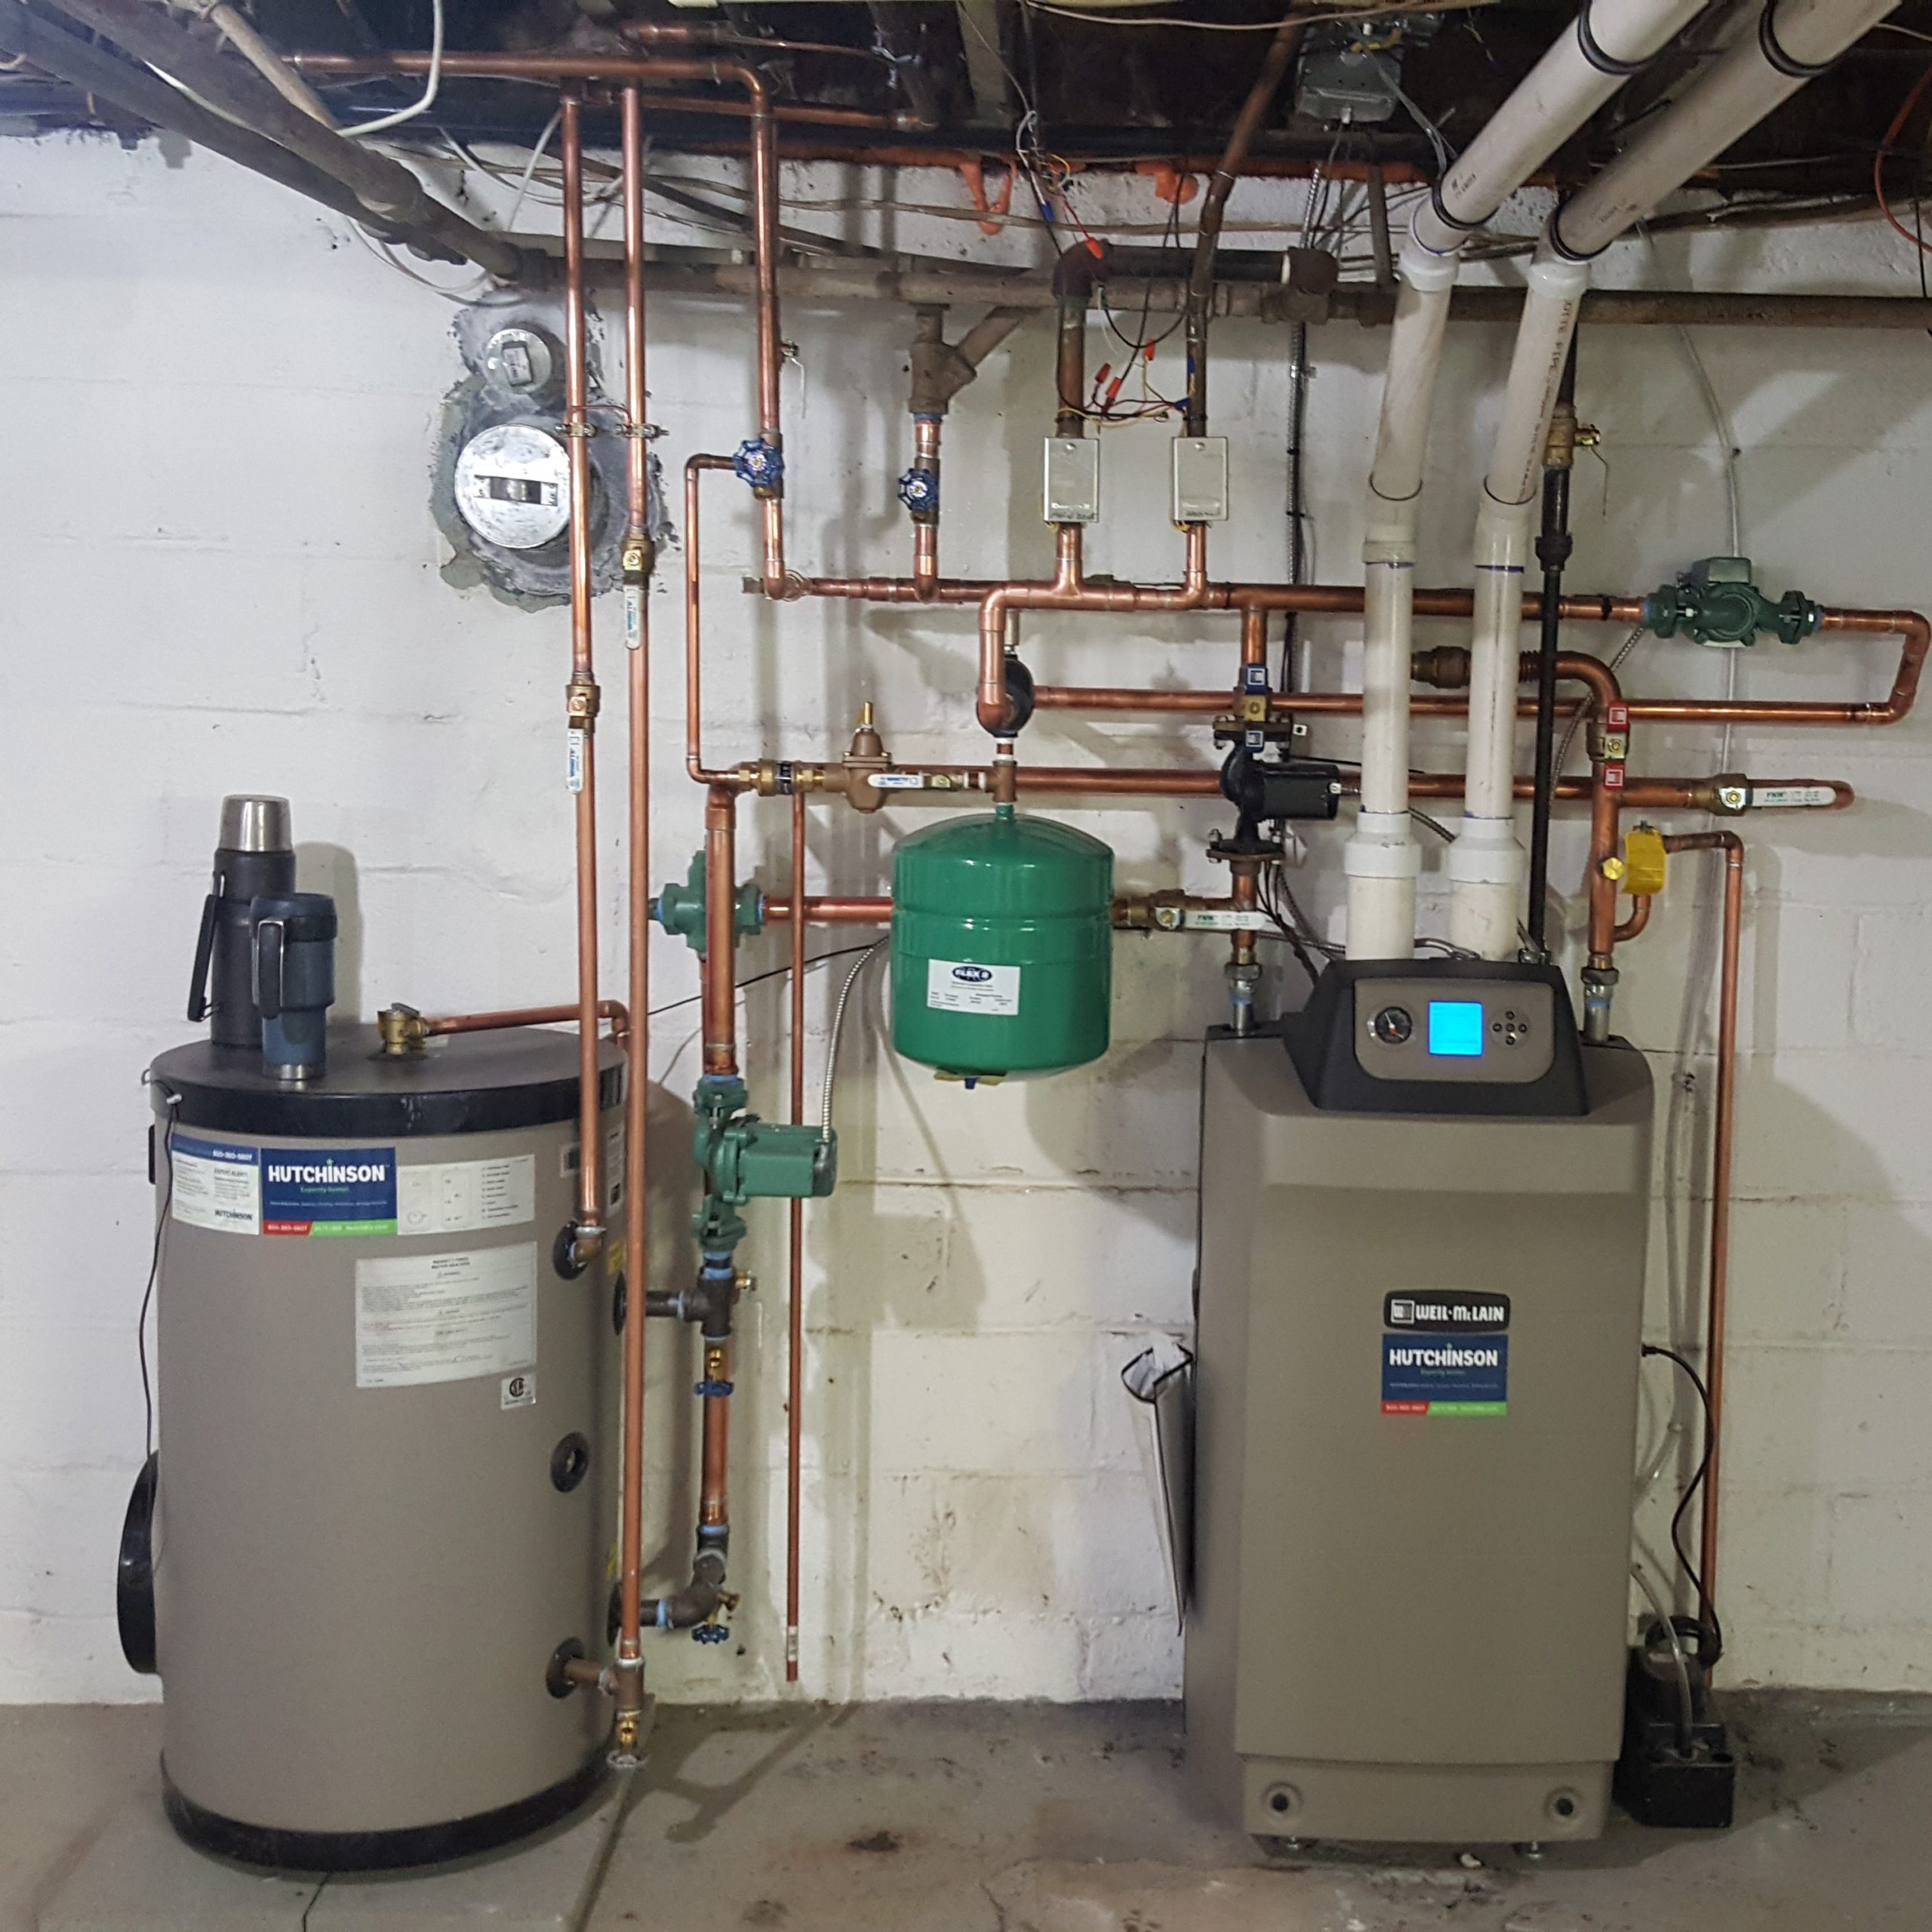 Plumbing, Heating and Air Conditioning Services in Farmingdale, NJ